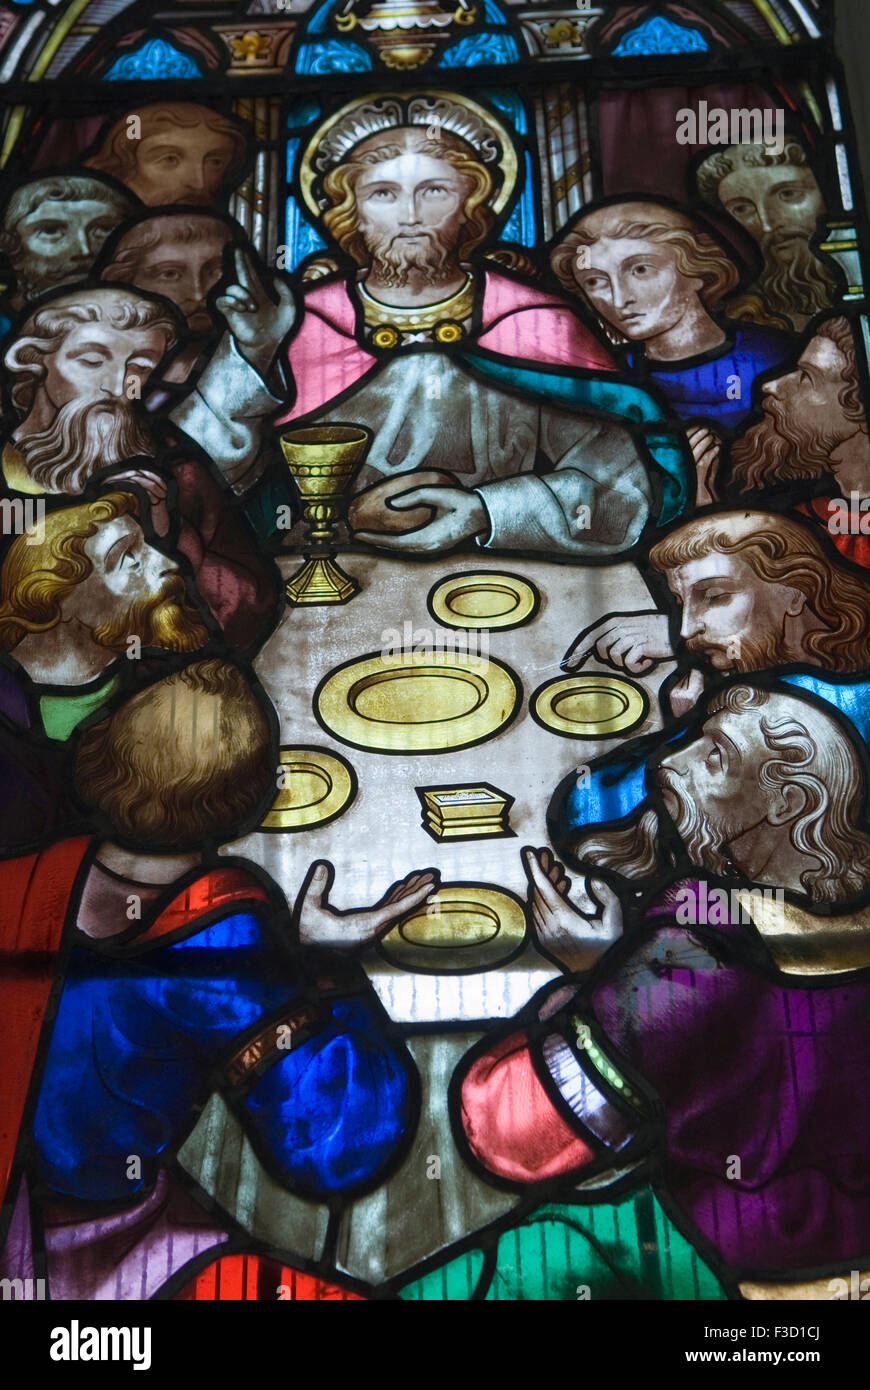 Modern stained glass window of Christ at The Last Supper in St Marys Church Bumpstead, Essex, England 2nd October 2015.  HOMER SYKES Stock Photo